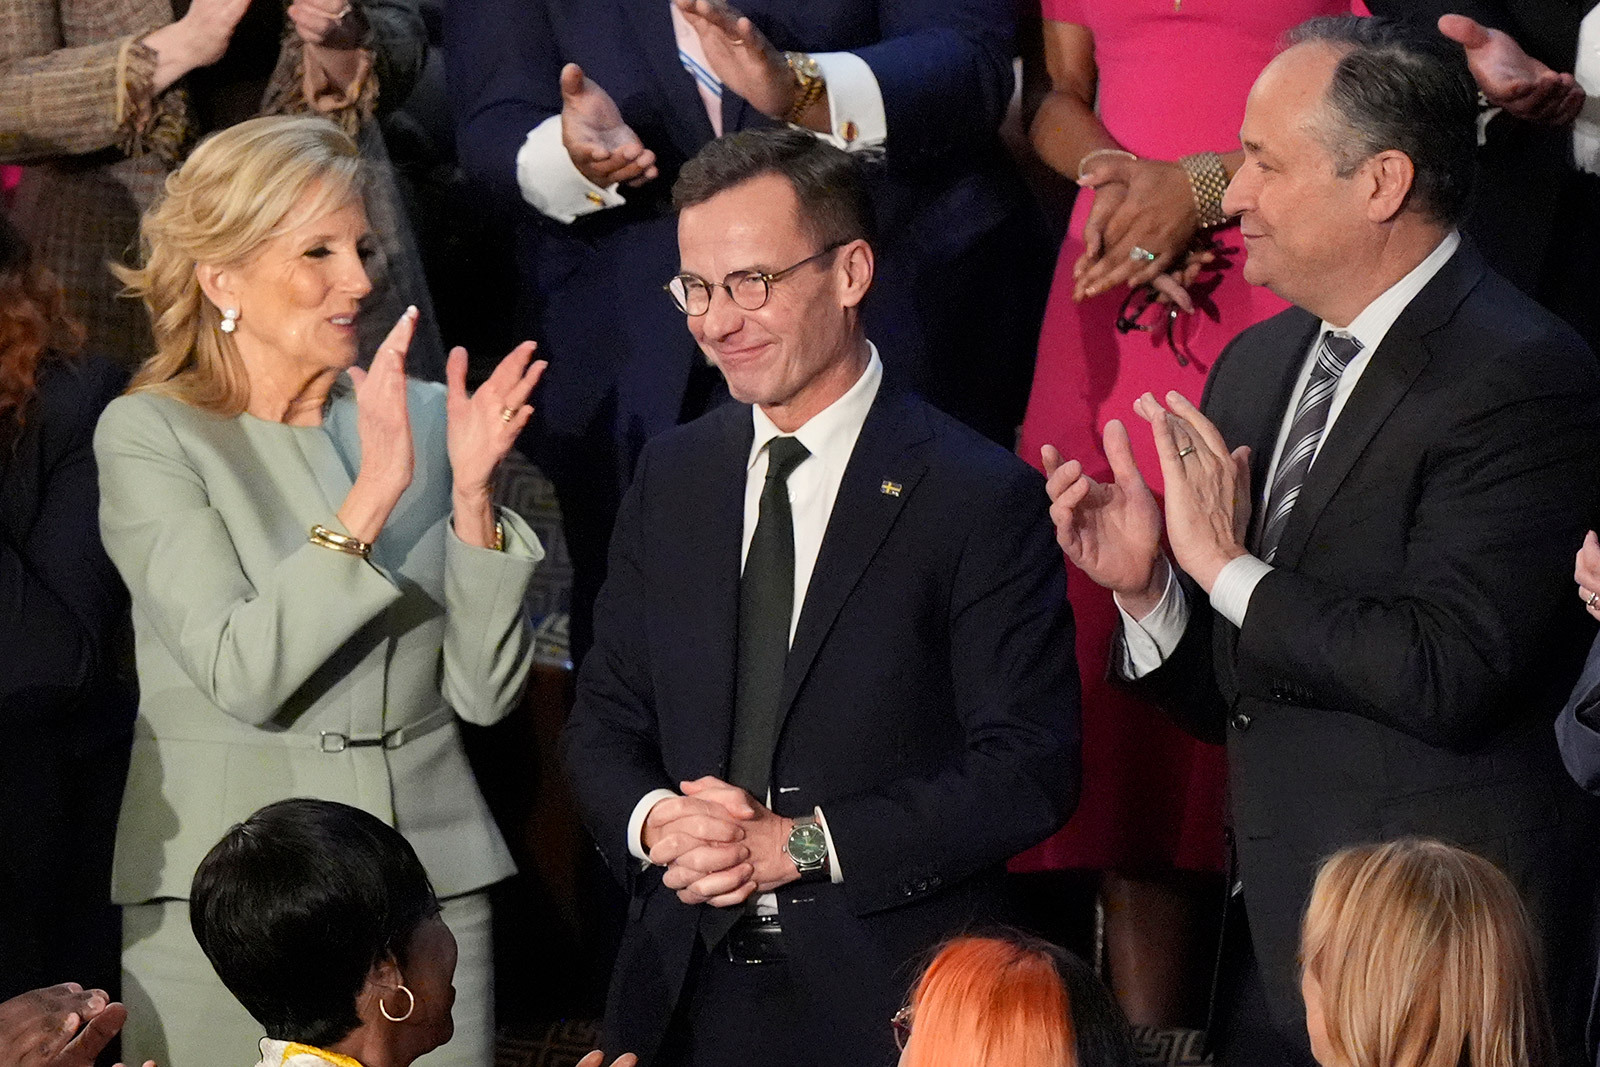 First lady Jill Biden and second gentleman Doug Emhoff applaud Sweden's Prime Minister Ulf Kristersson. Sweden officially joined NATO on Thursday.